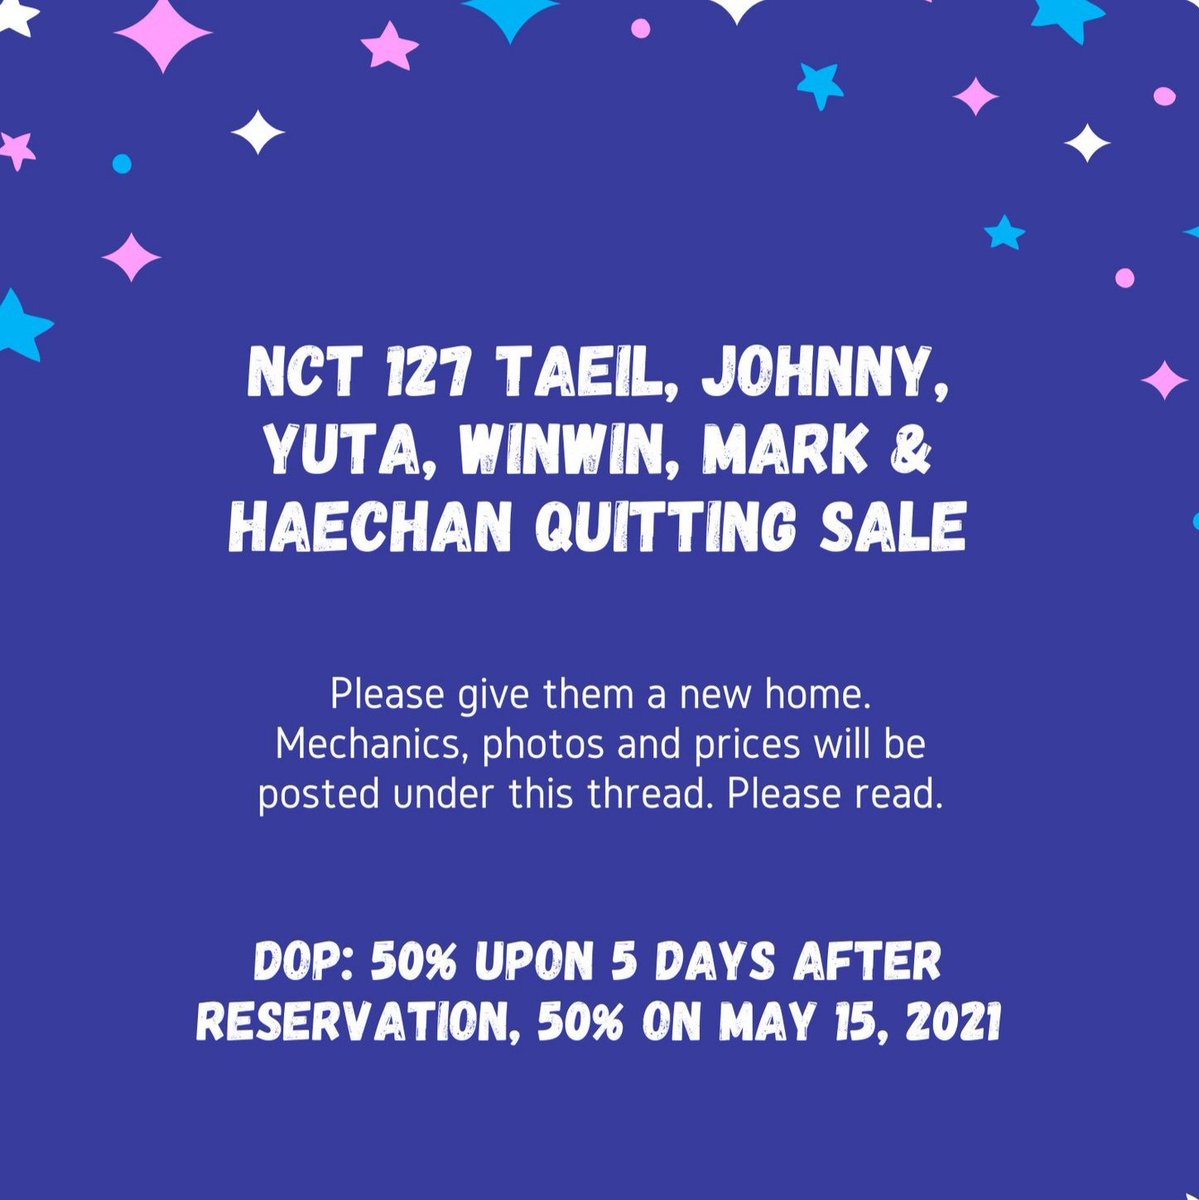  _dyngienim NCT 127 Taeil, Johnny, Yuta, Winwin, Mark & Haechan Photocard Quitting Sale Photos, prices and other details will be posted under this thread.Reservation form will be posted TONIGHT, at exactly 8PM. MOP: Gcash, BPI MOD: GGX, LBC Thank you! 